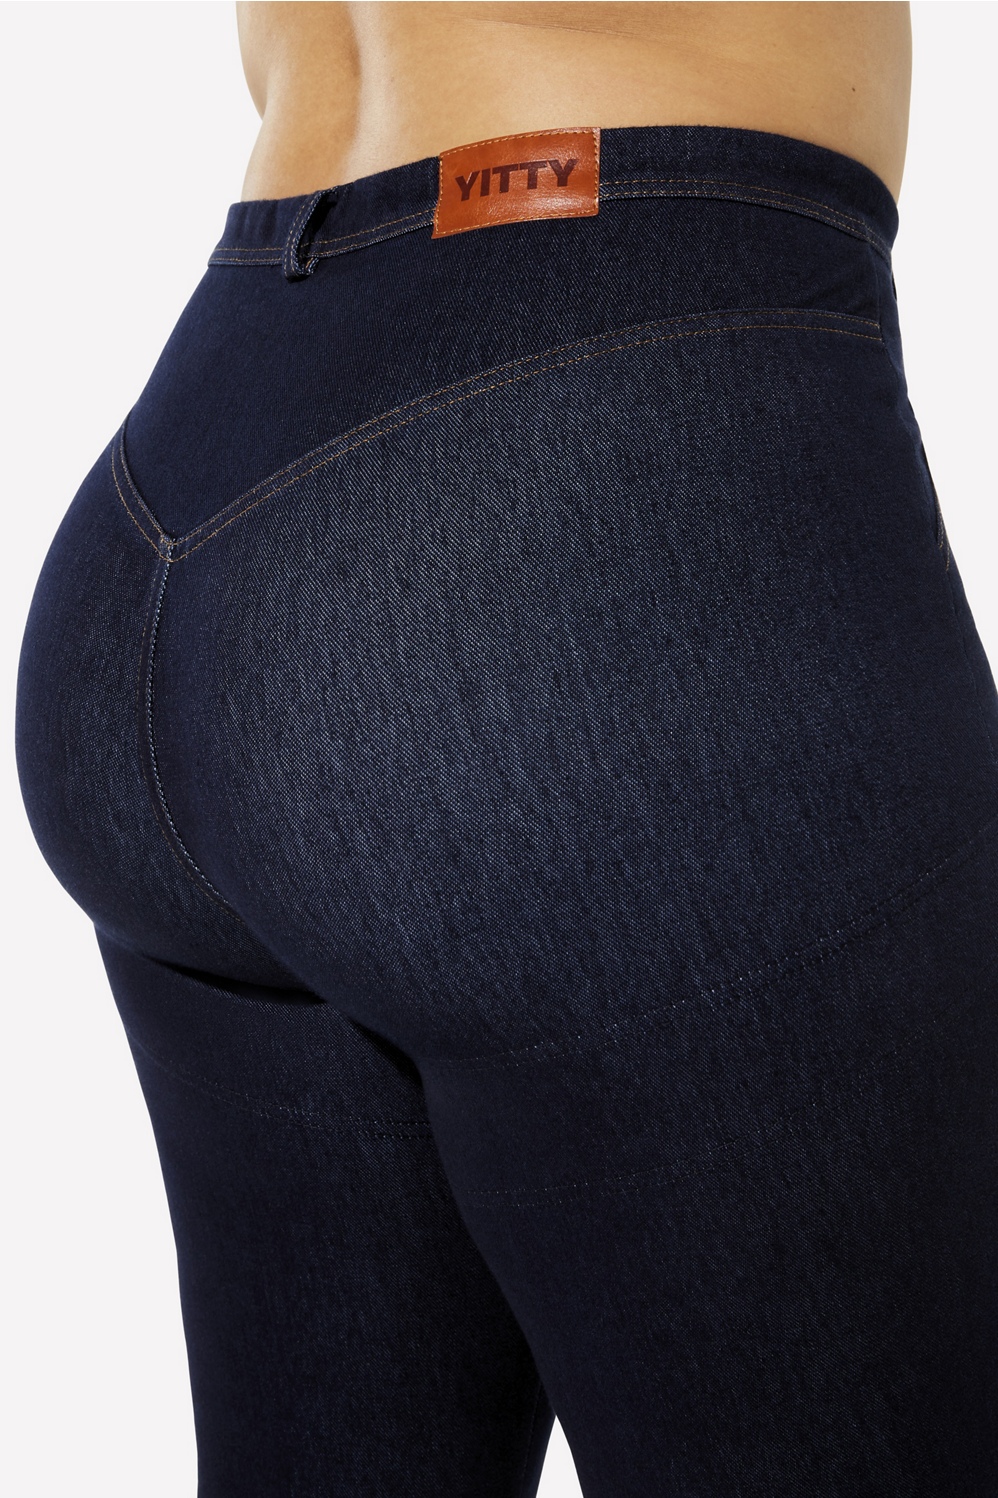 Denim Stretch Is Yitty Jean Served - Smoothing